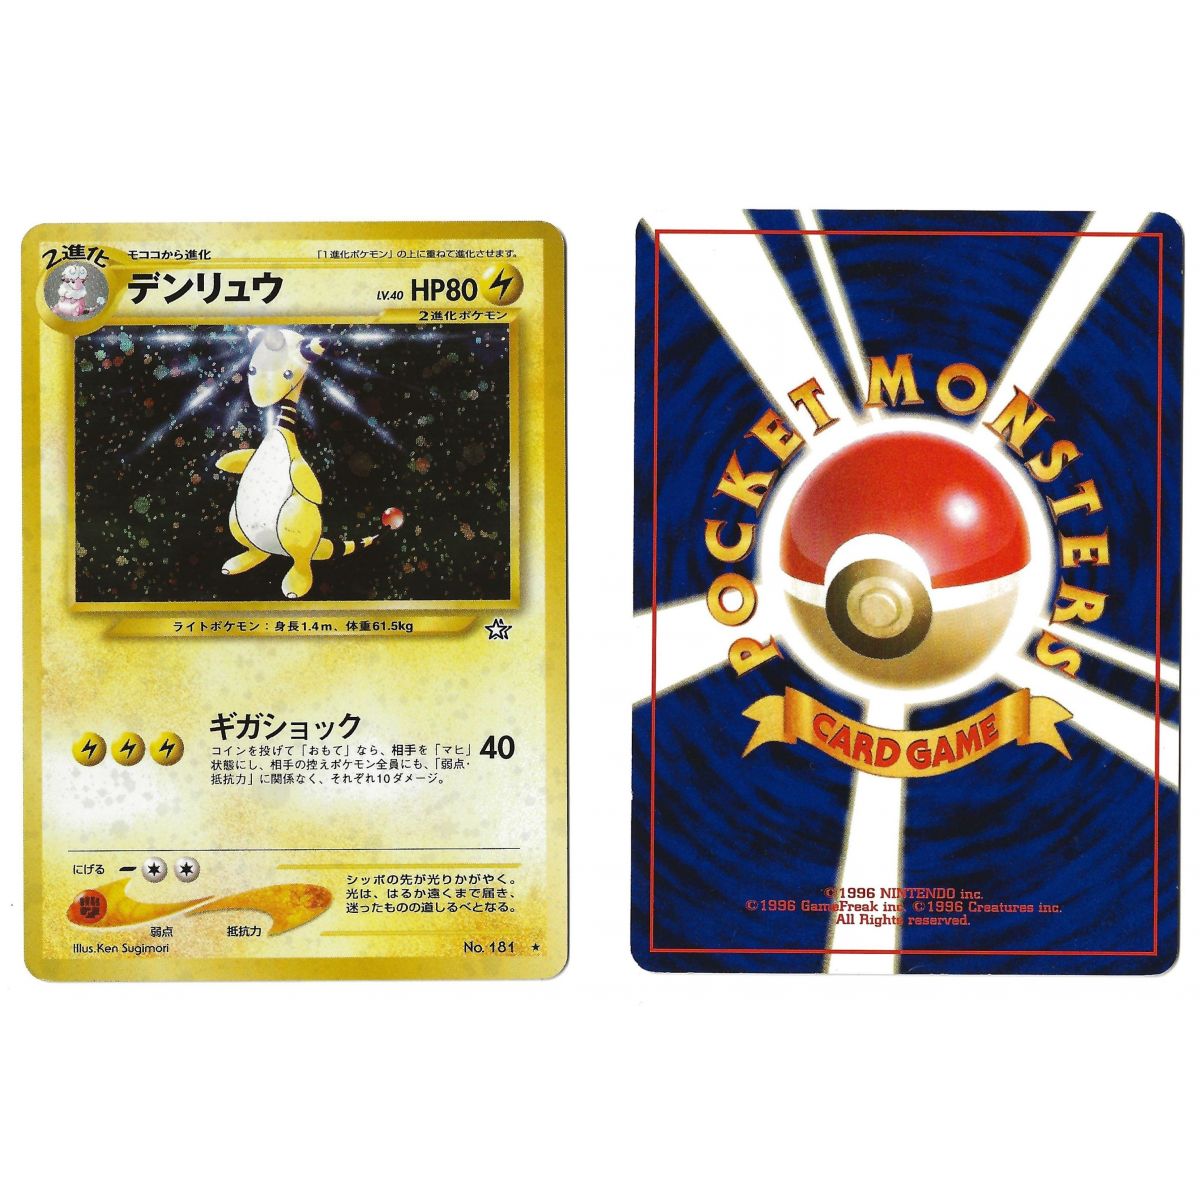 Ampharos (2) No.181 Gold, Silver, to a New World... N1 Holo Unlimited Japonais Voir Scan